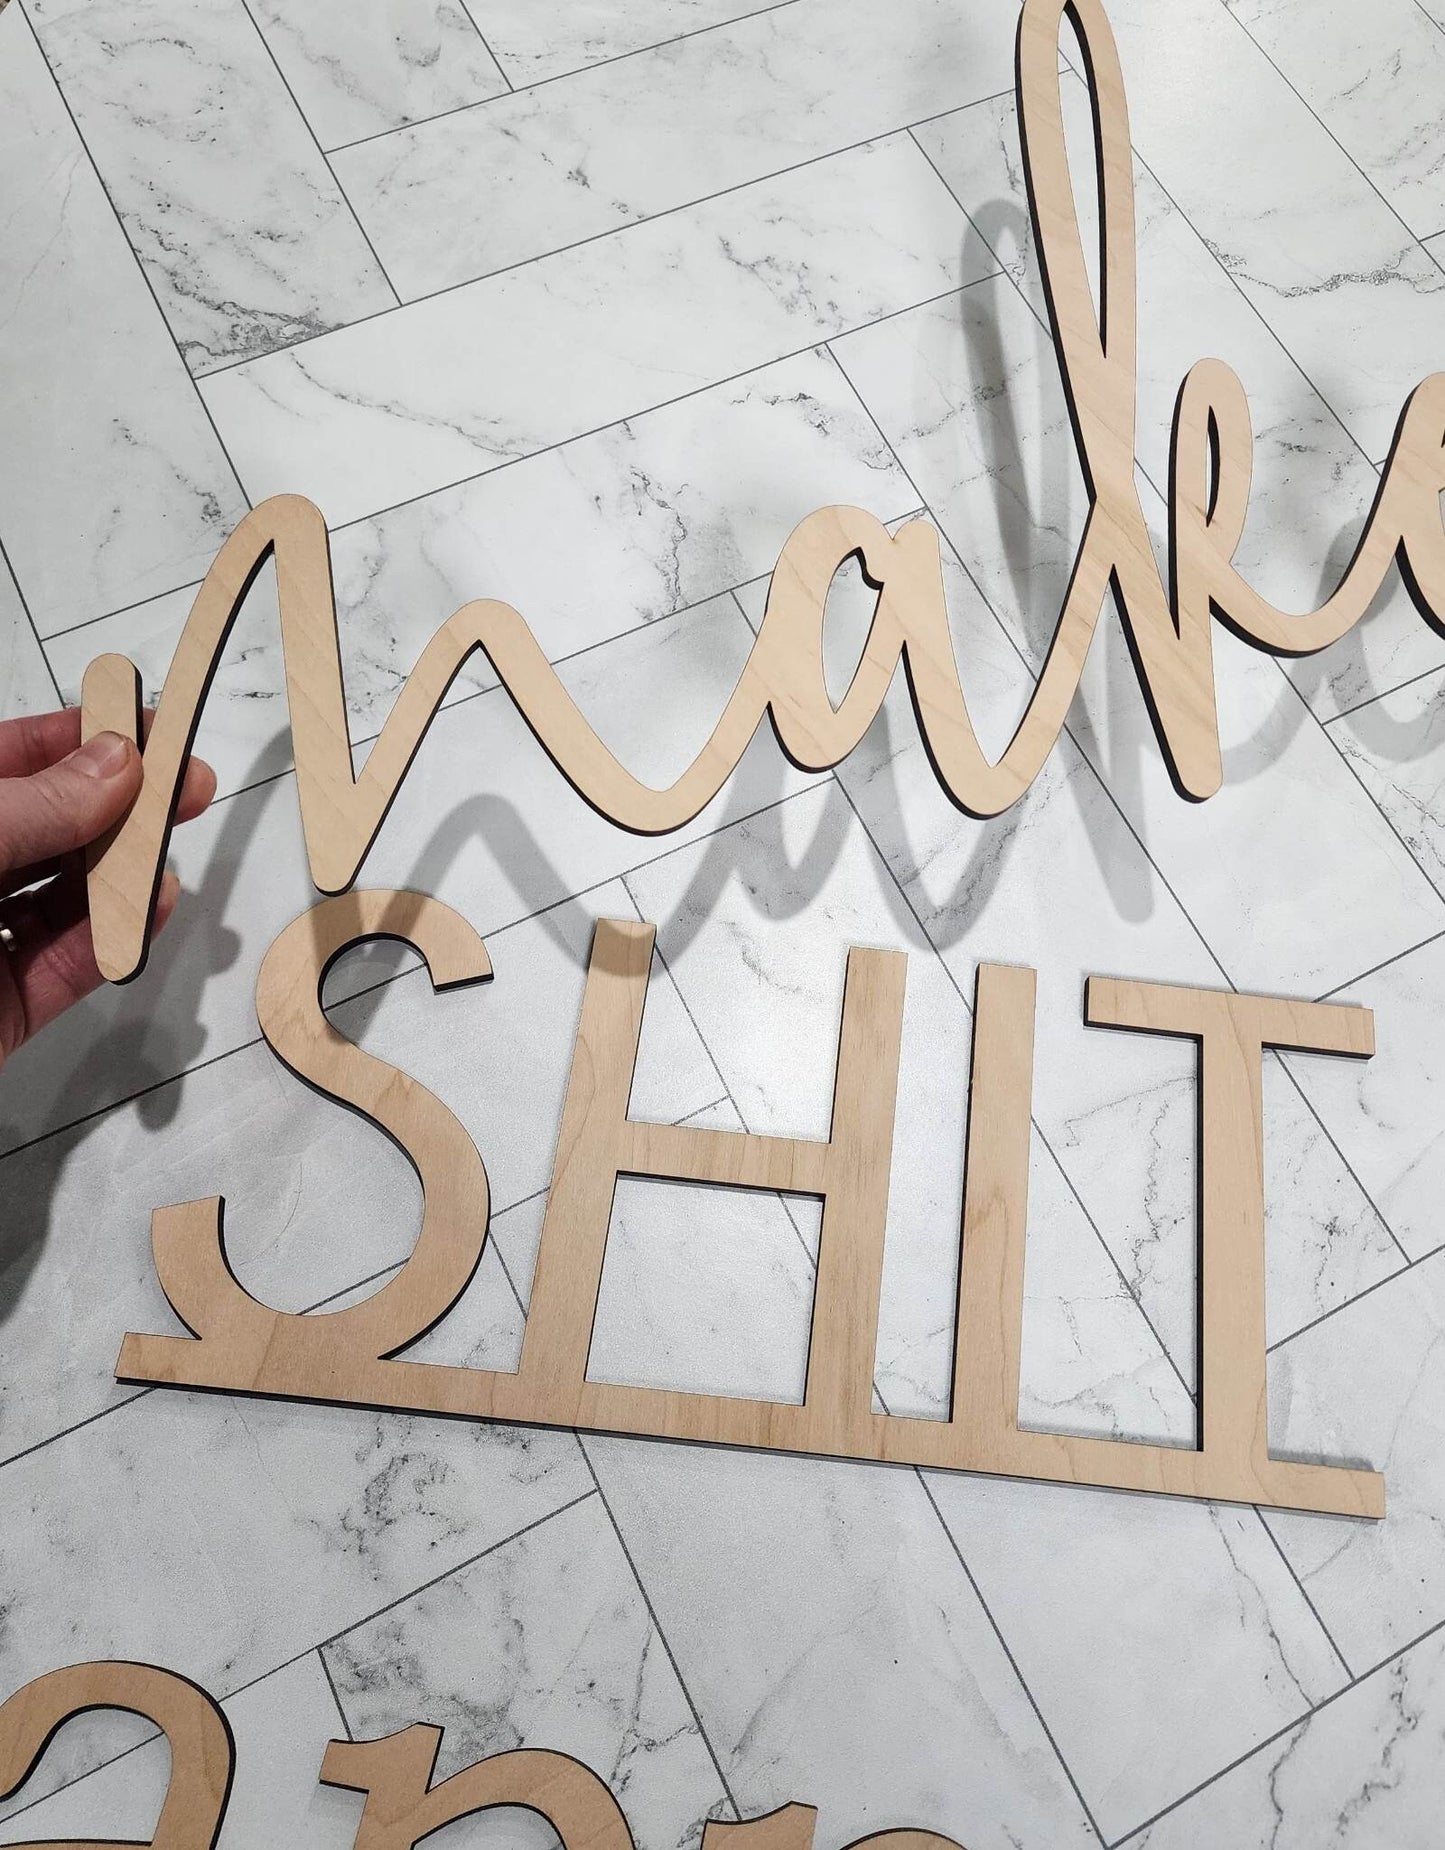 make SHIT happen bathroom sign decor, funny bathroom wall sign, wood wall art for restroom, humor funny housewarming gift, above toilet sign